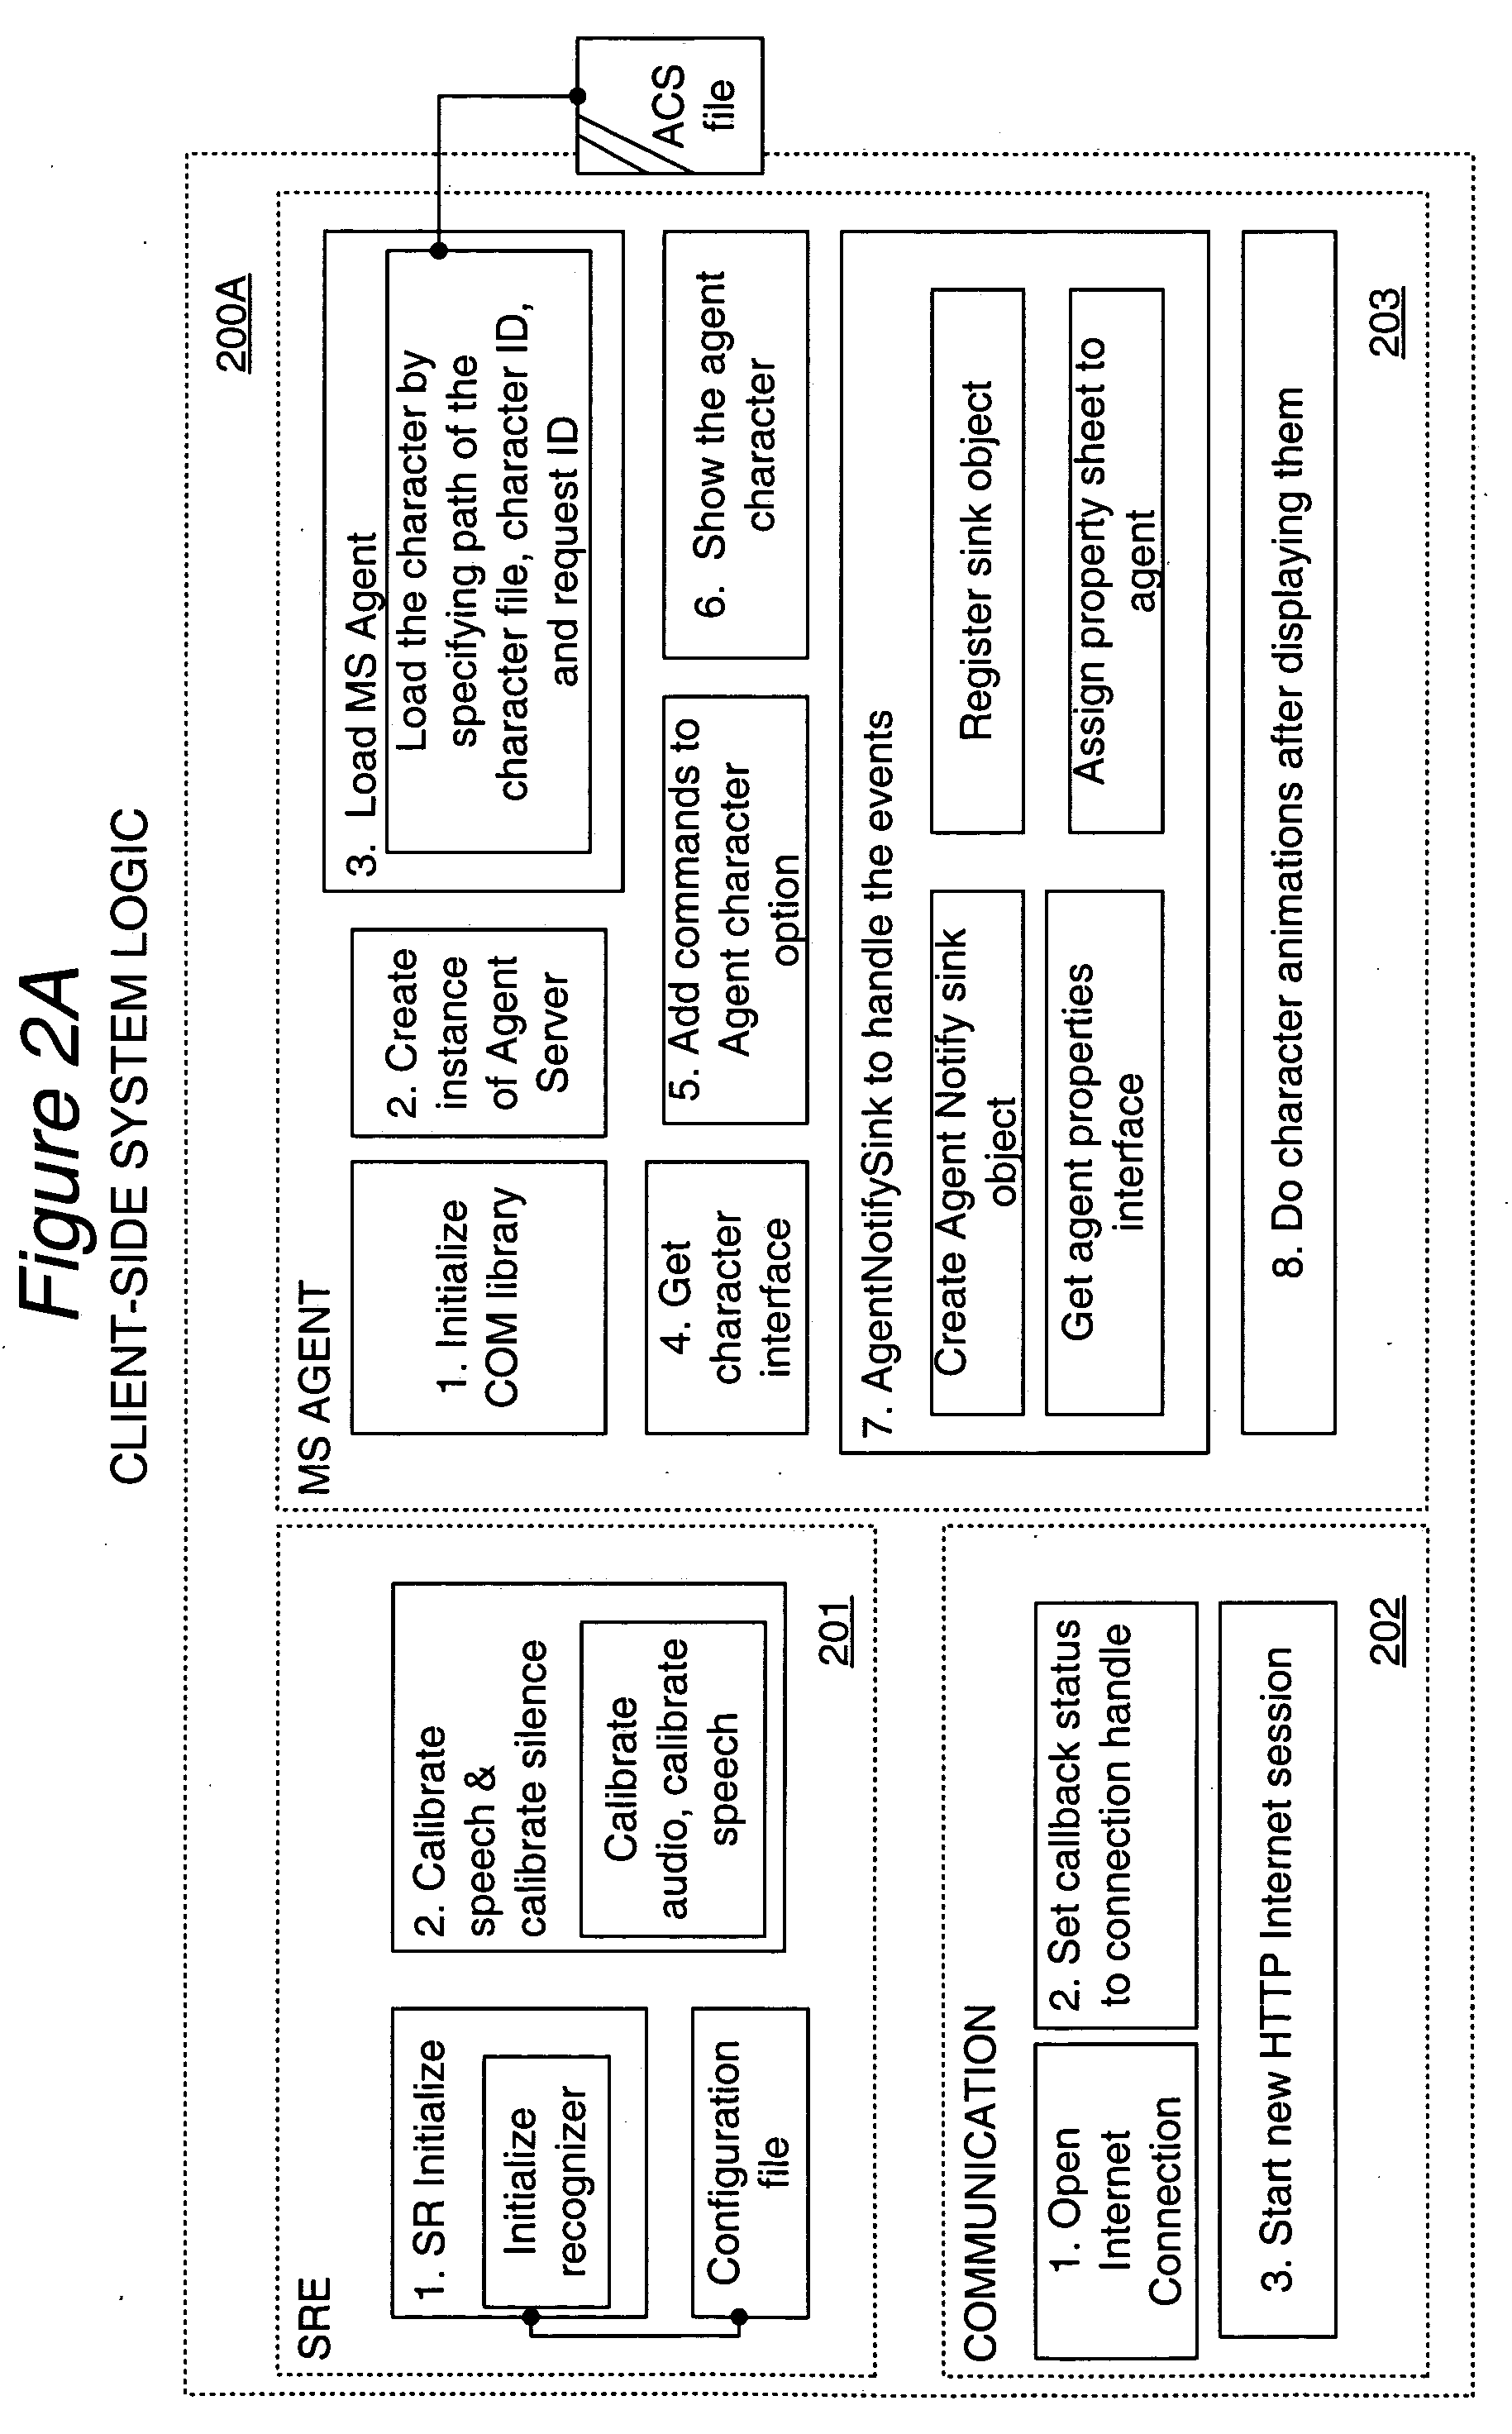 Distributed real time speech recognition system